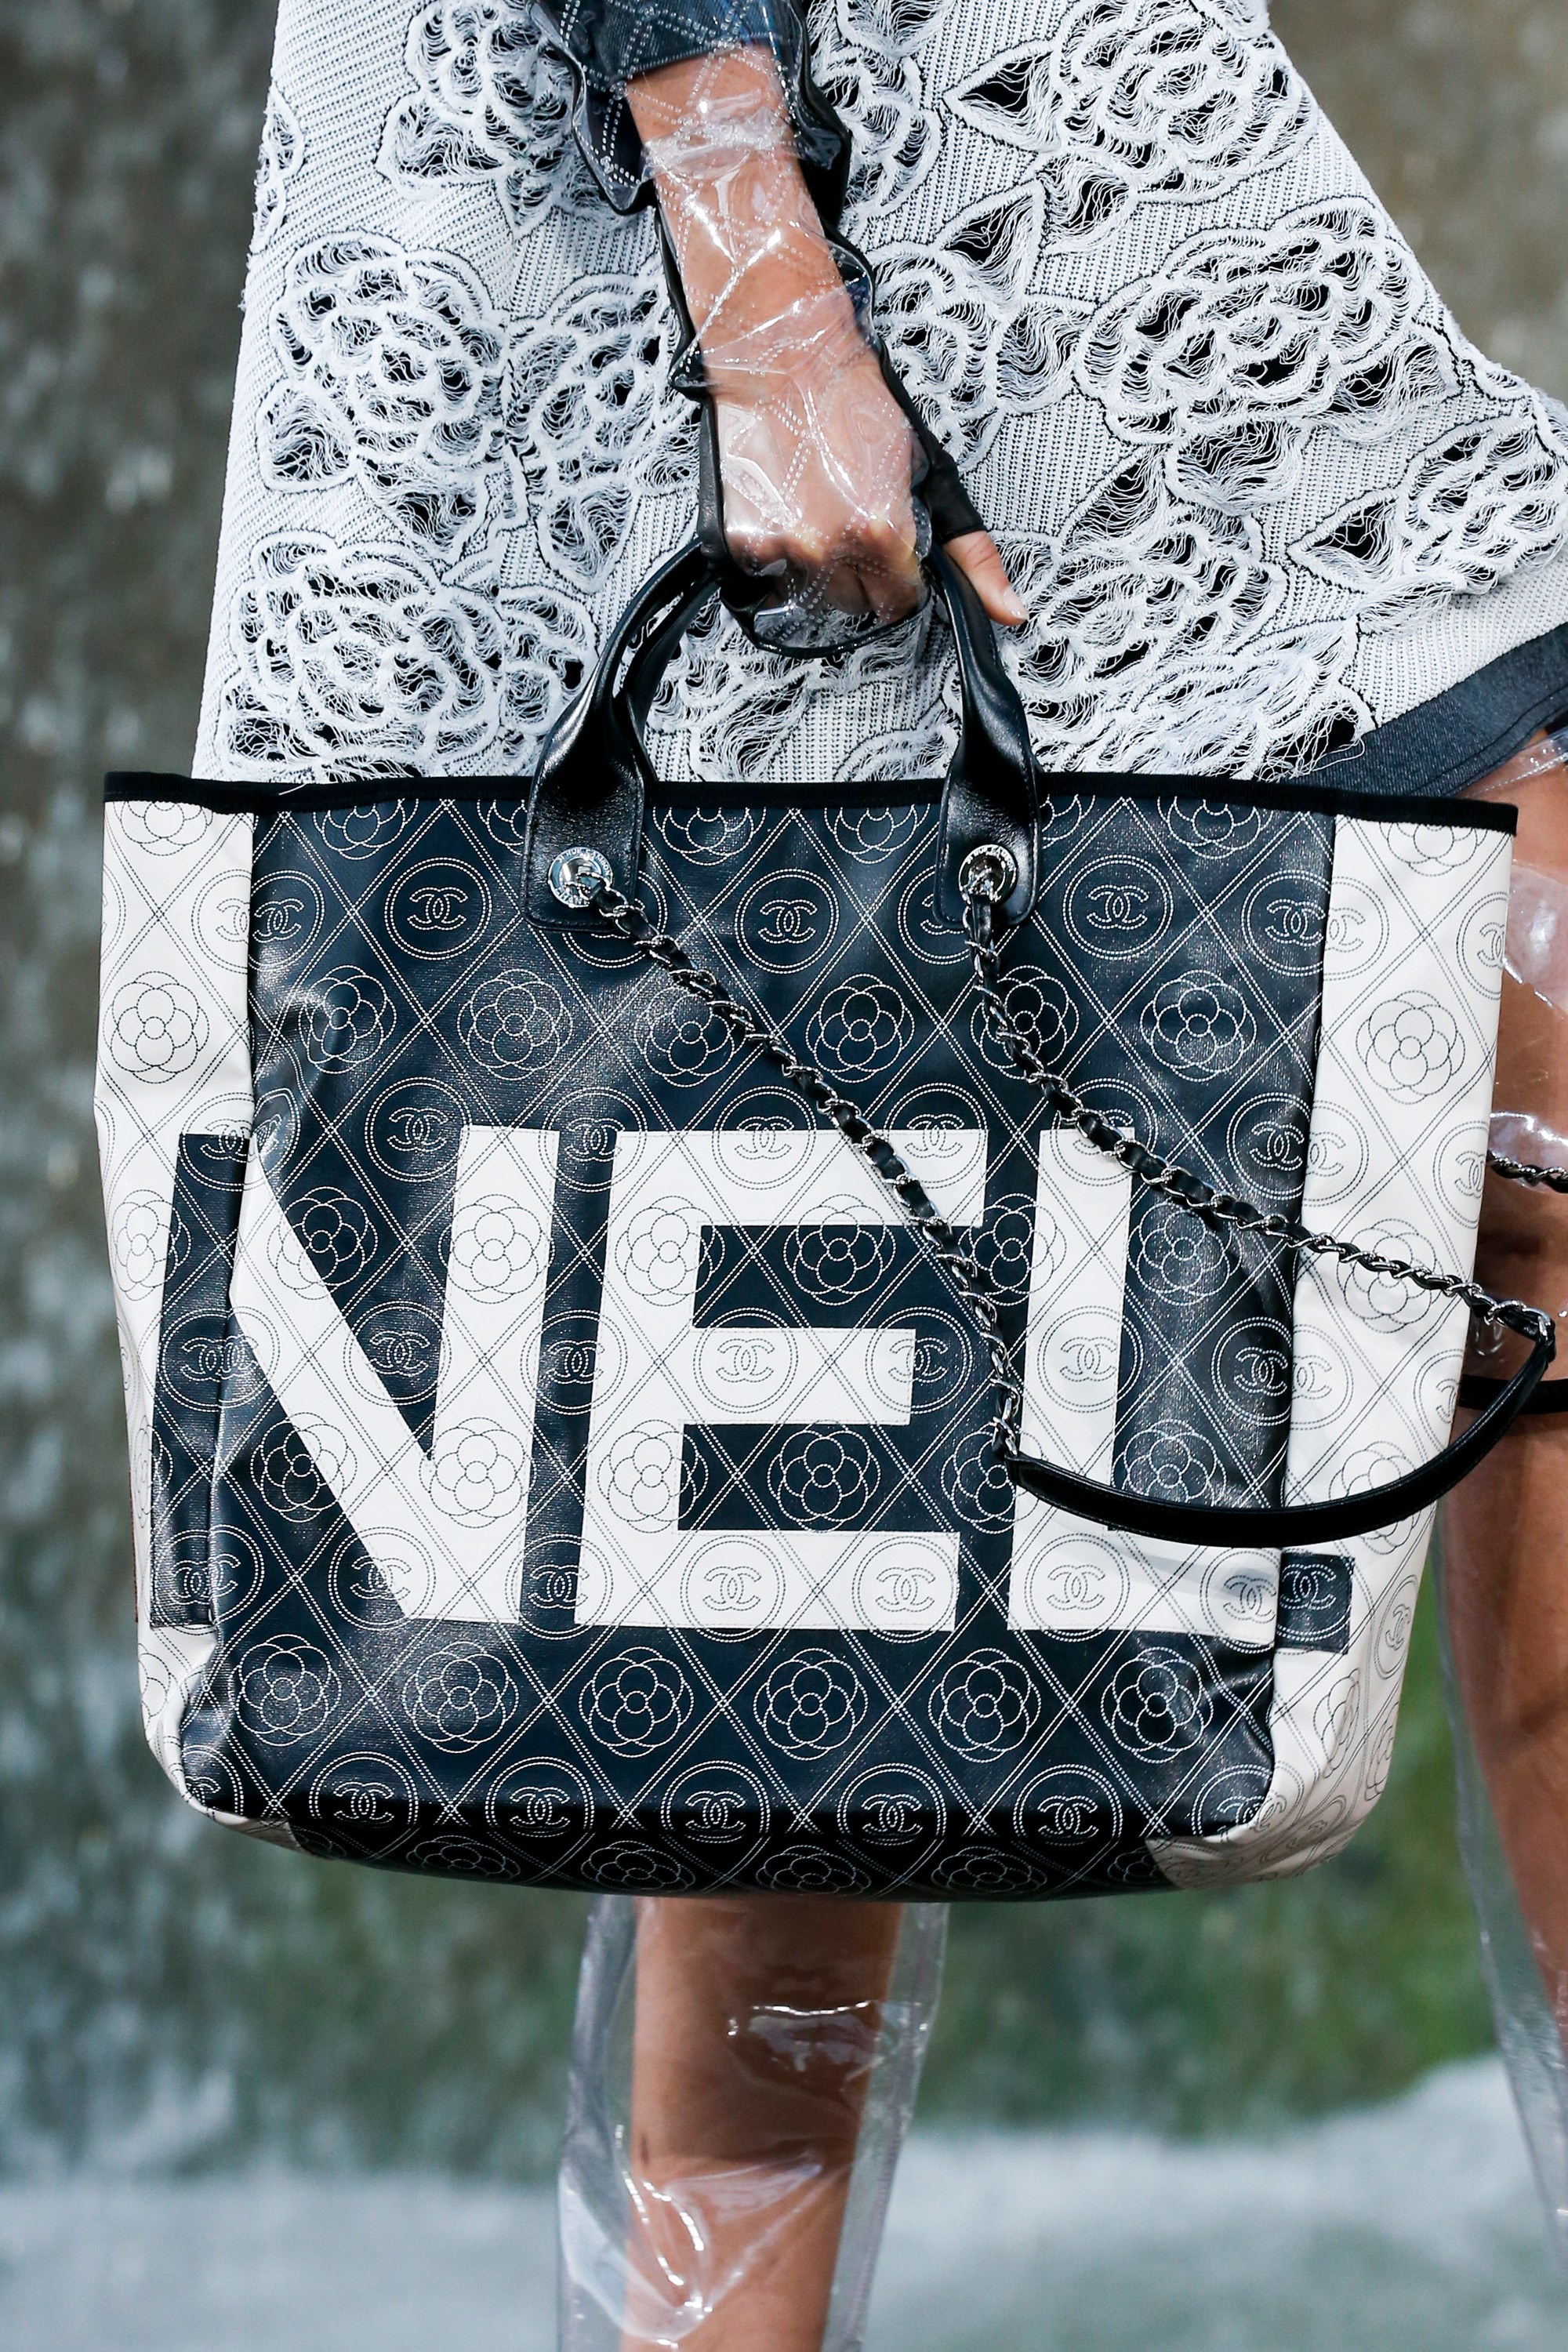 Chanel Releases Spring 2018 Handbag Collection with 100+ of Its